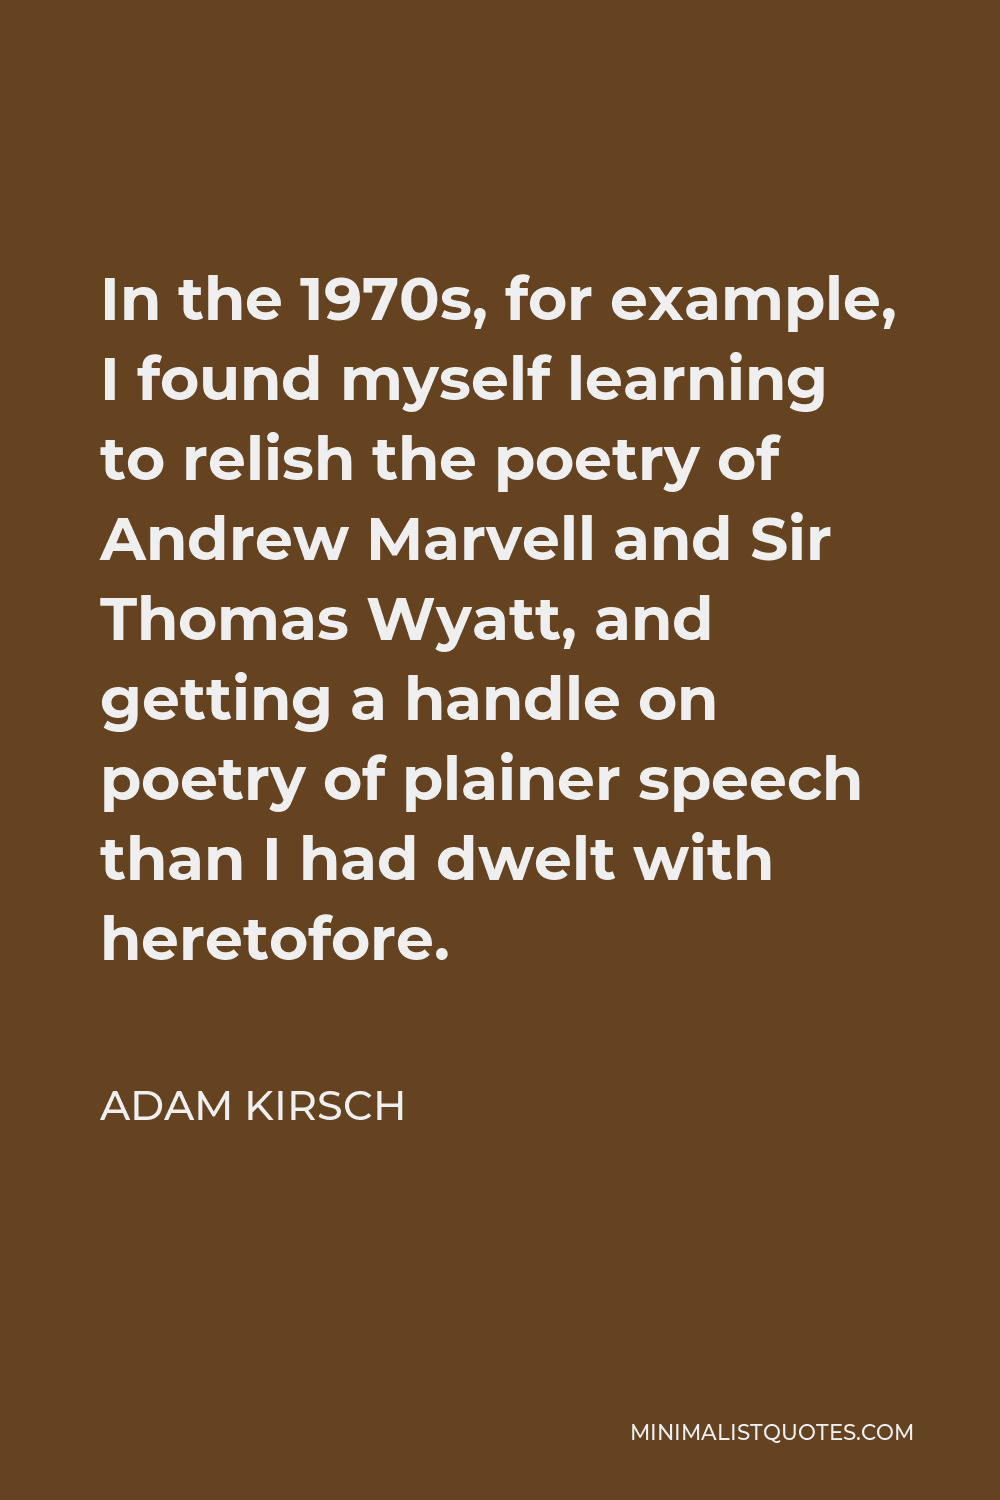 Adam Kirsch Quote - In the 1970s, for example, I found myself learning to relish the poetry of Andrew Marvell and Sir Thomas Wyatt, and getting a handle on poetry of plainer speech than I had dwelt with heretofore.